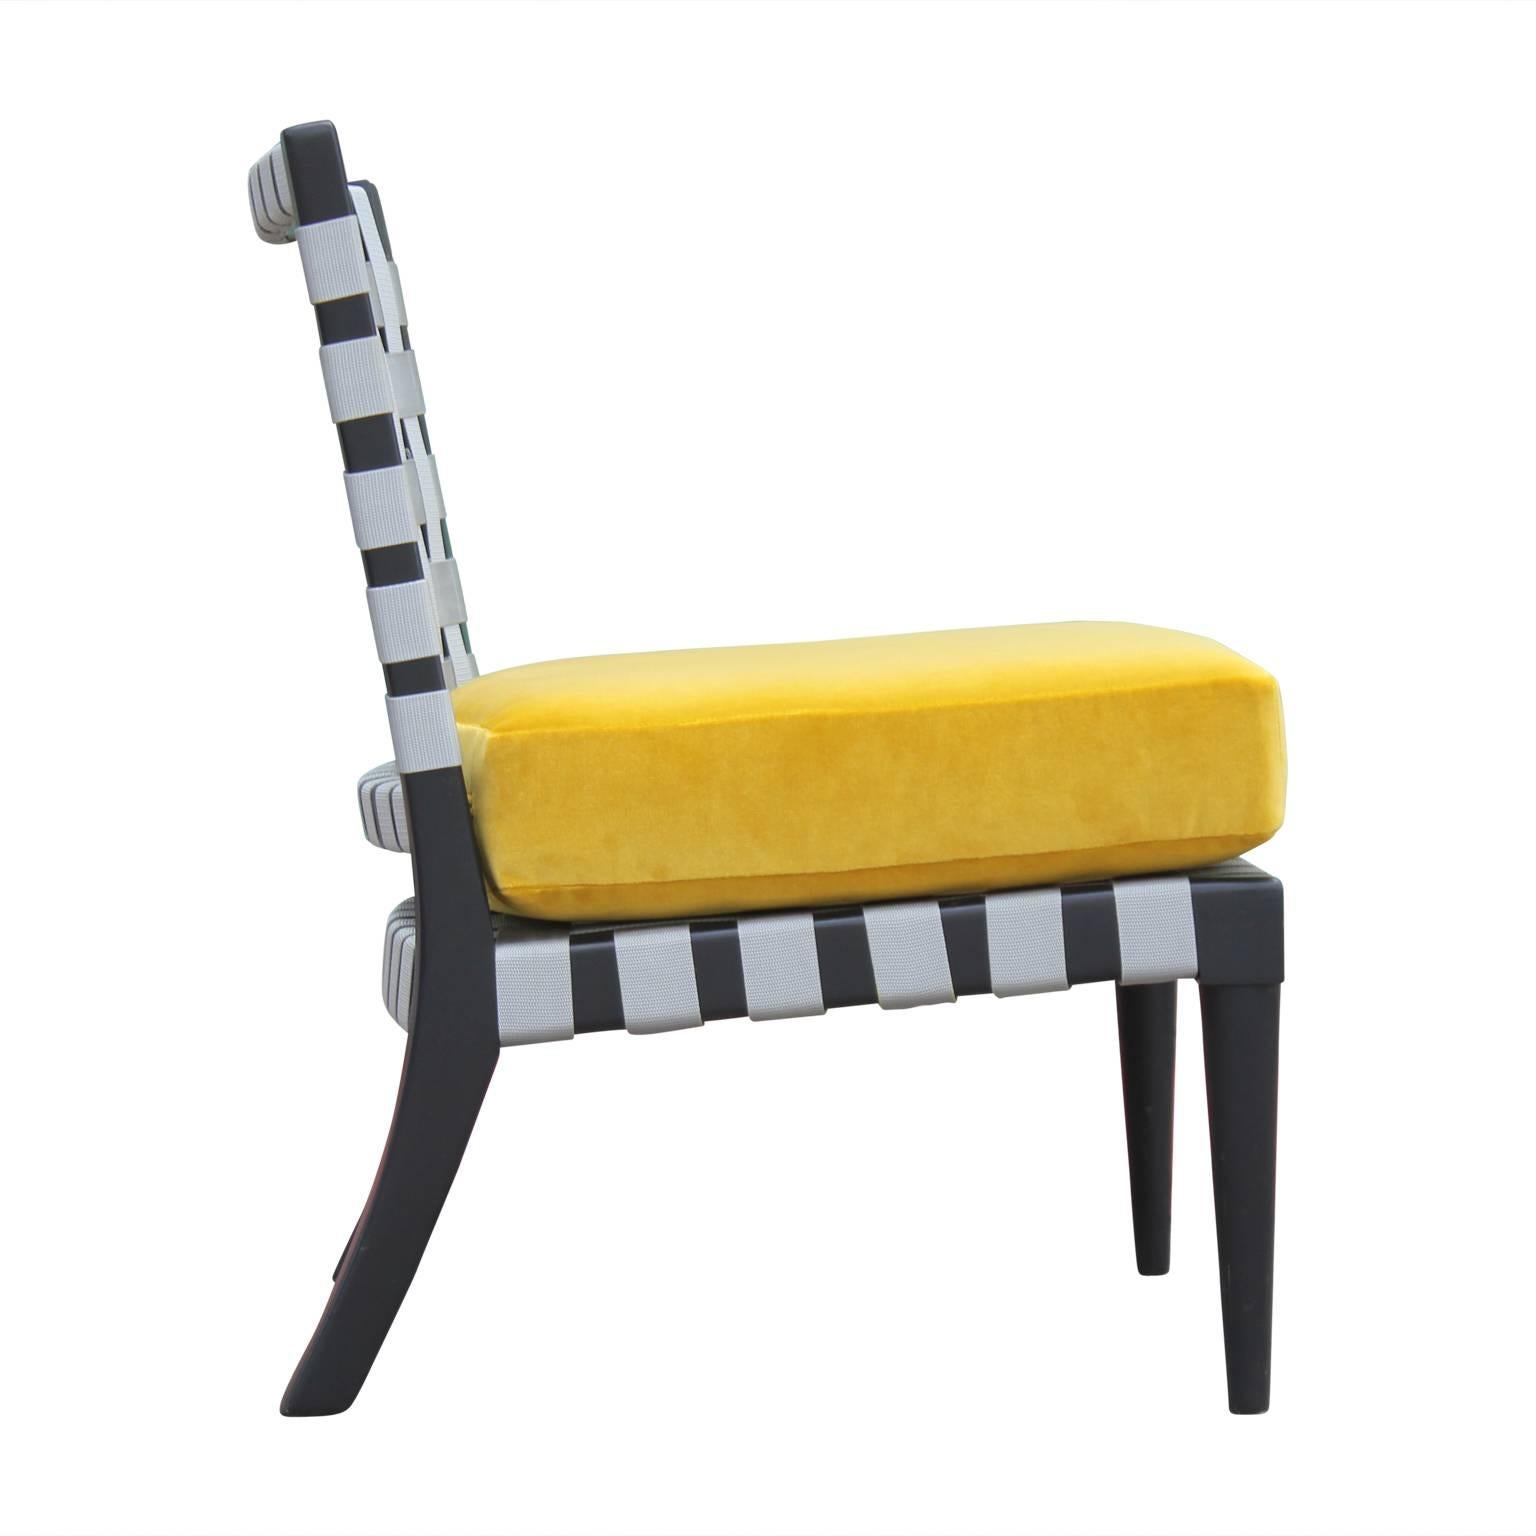 Large VW strap chair with yellow velvet, designed by Vincent Wolf (VW) for Niedermaier out of Chicago, IL. These have recently been reupholstered in our favourite yellow Kravet velvet. The straps are a nice light grey and are in perfect condition,